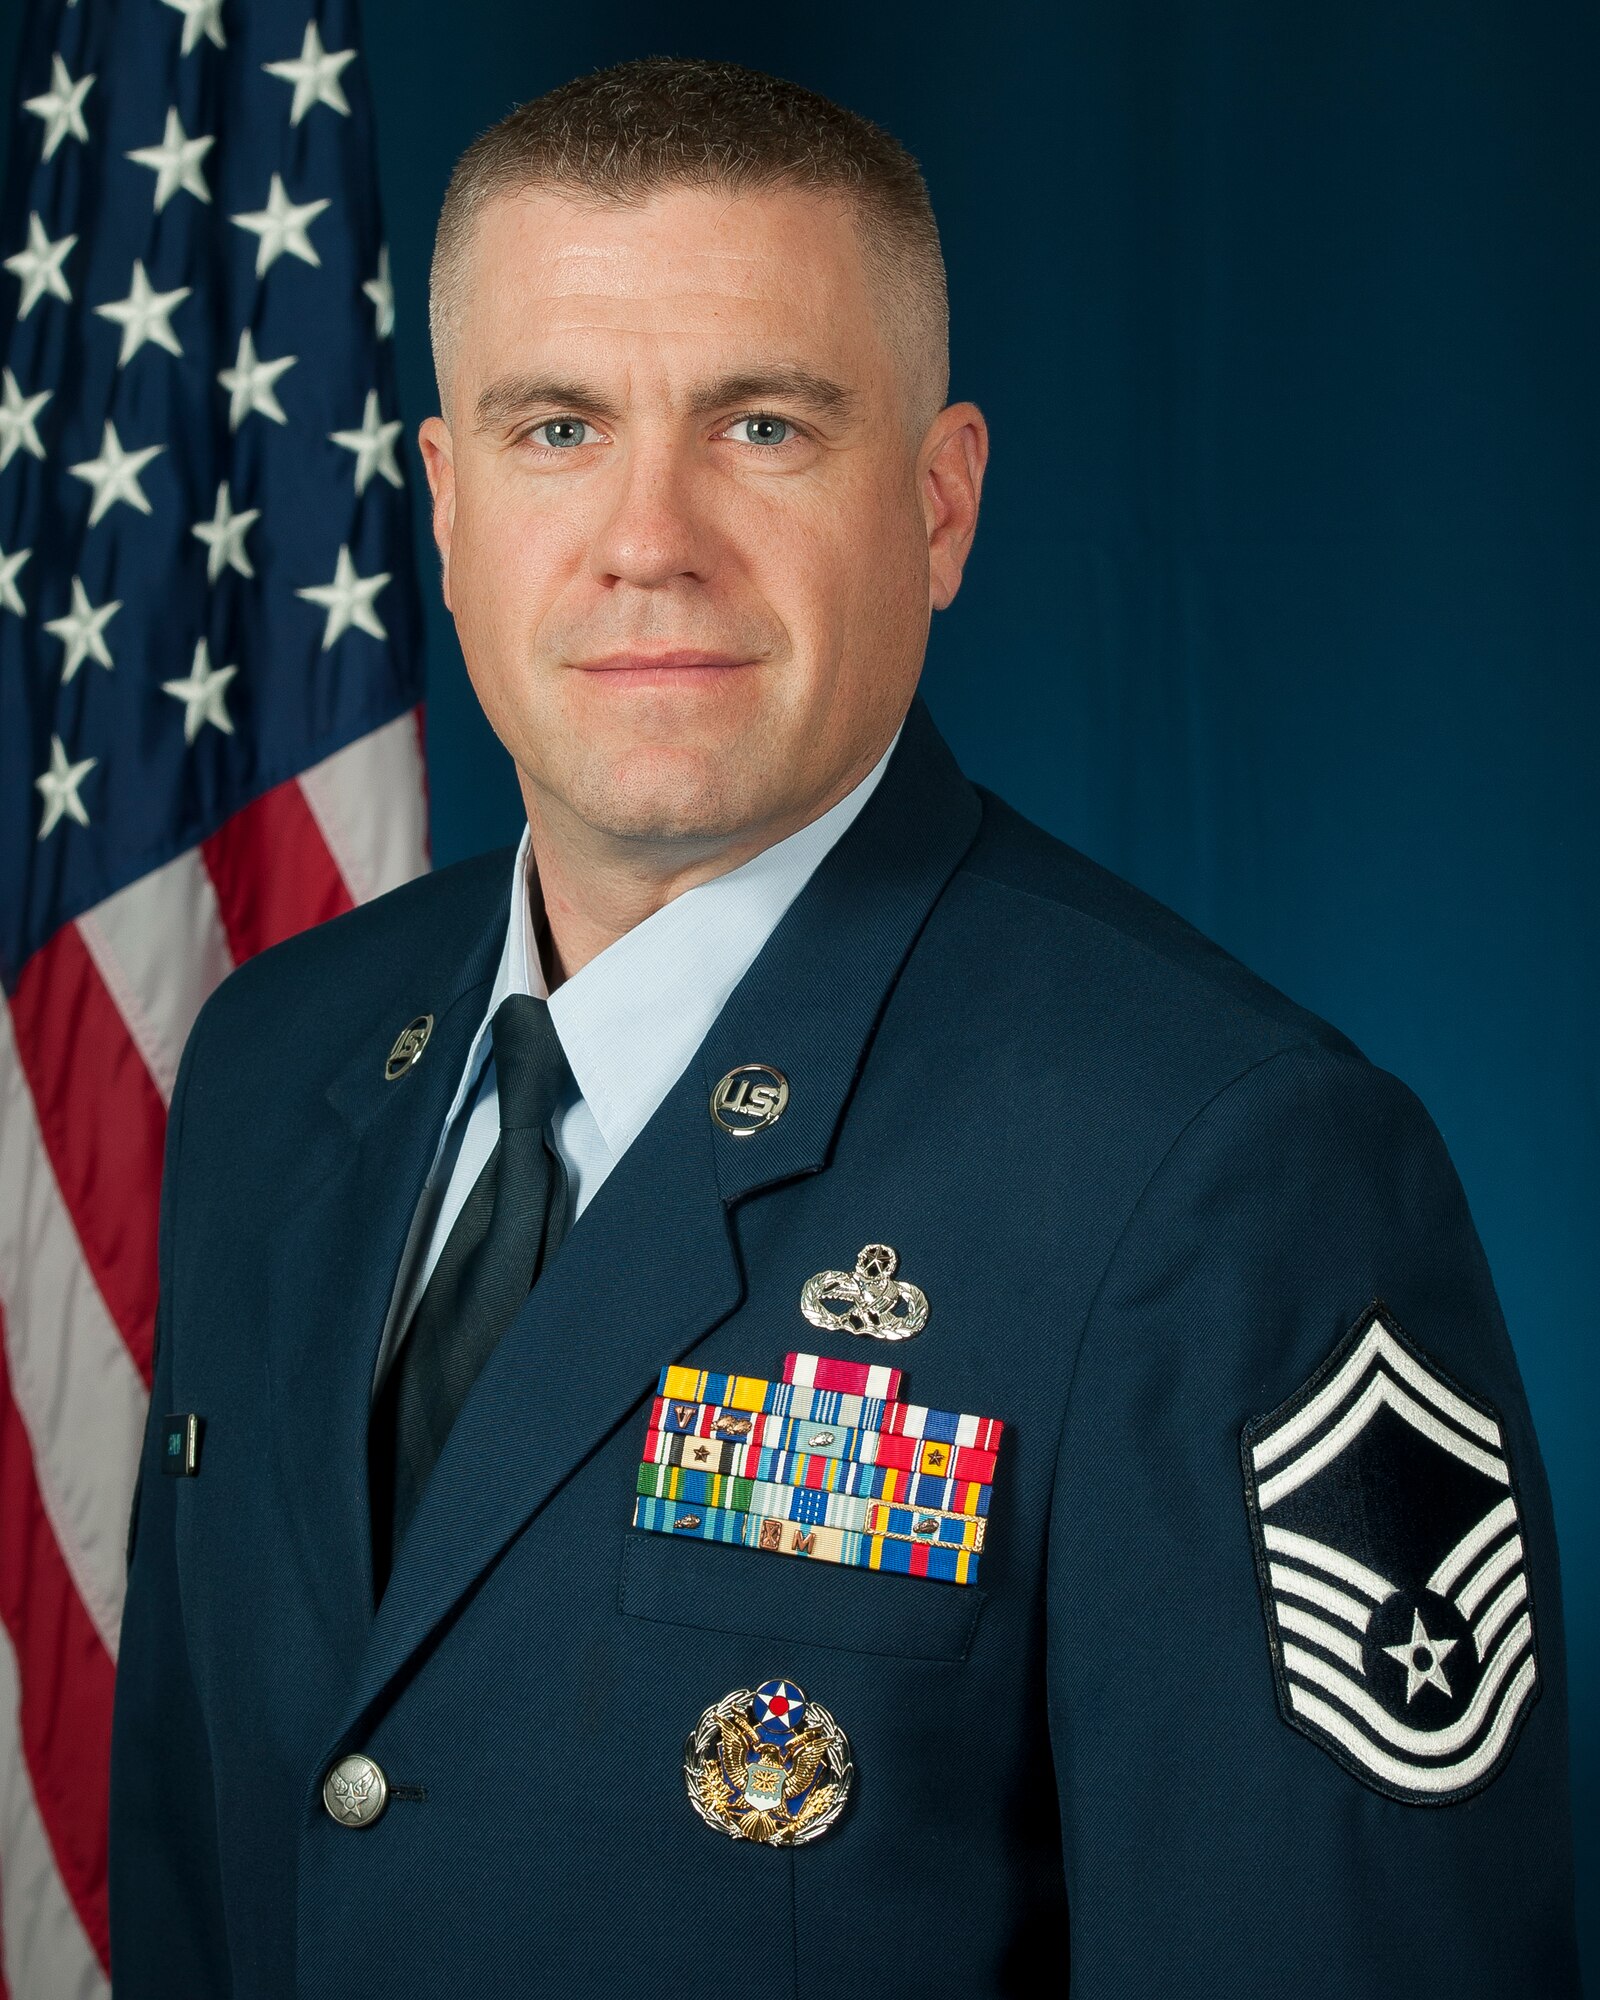 Senior Master Sgt. Mikael Sundin, Senior Enlisted Leadership Management Office superintendent, Nov 30, 2015, Air National Guard Readiness Center, Joint Base Andrews, Md. Sundin, previously a fabrication element supervisor with the 140th Wing in Colorado, joined the SELMO team in November to help ANG senior enlisted members capitalize on professional opportunities and further develop as leaders. (Air National Guard photo by Master Sgt. Marvin Preston/released)